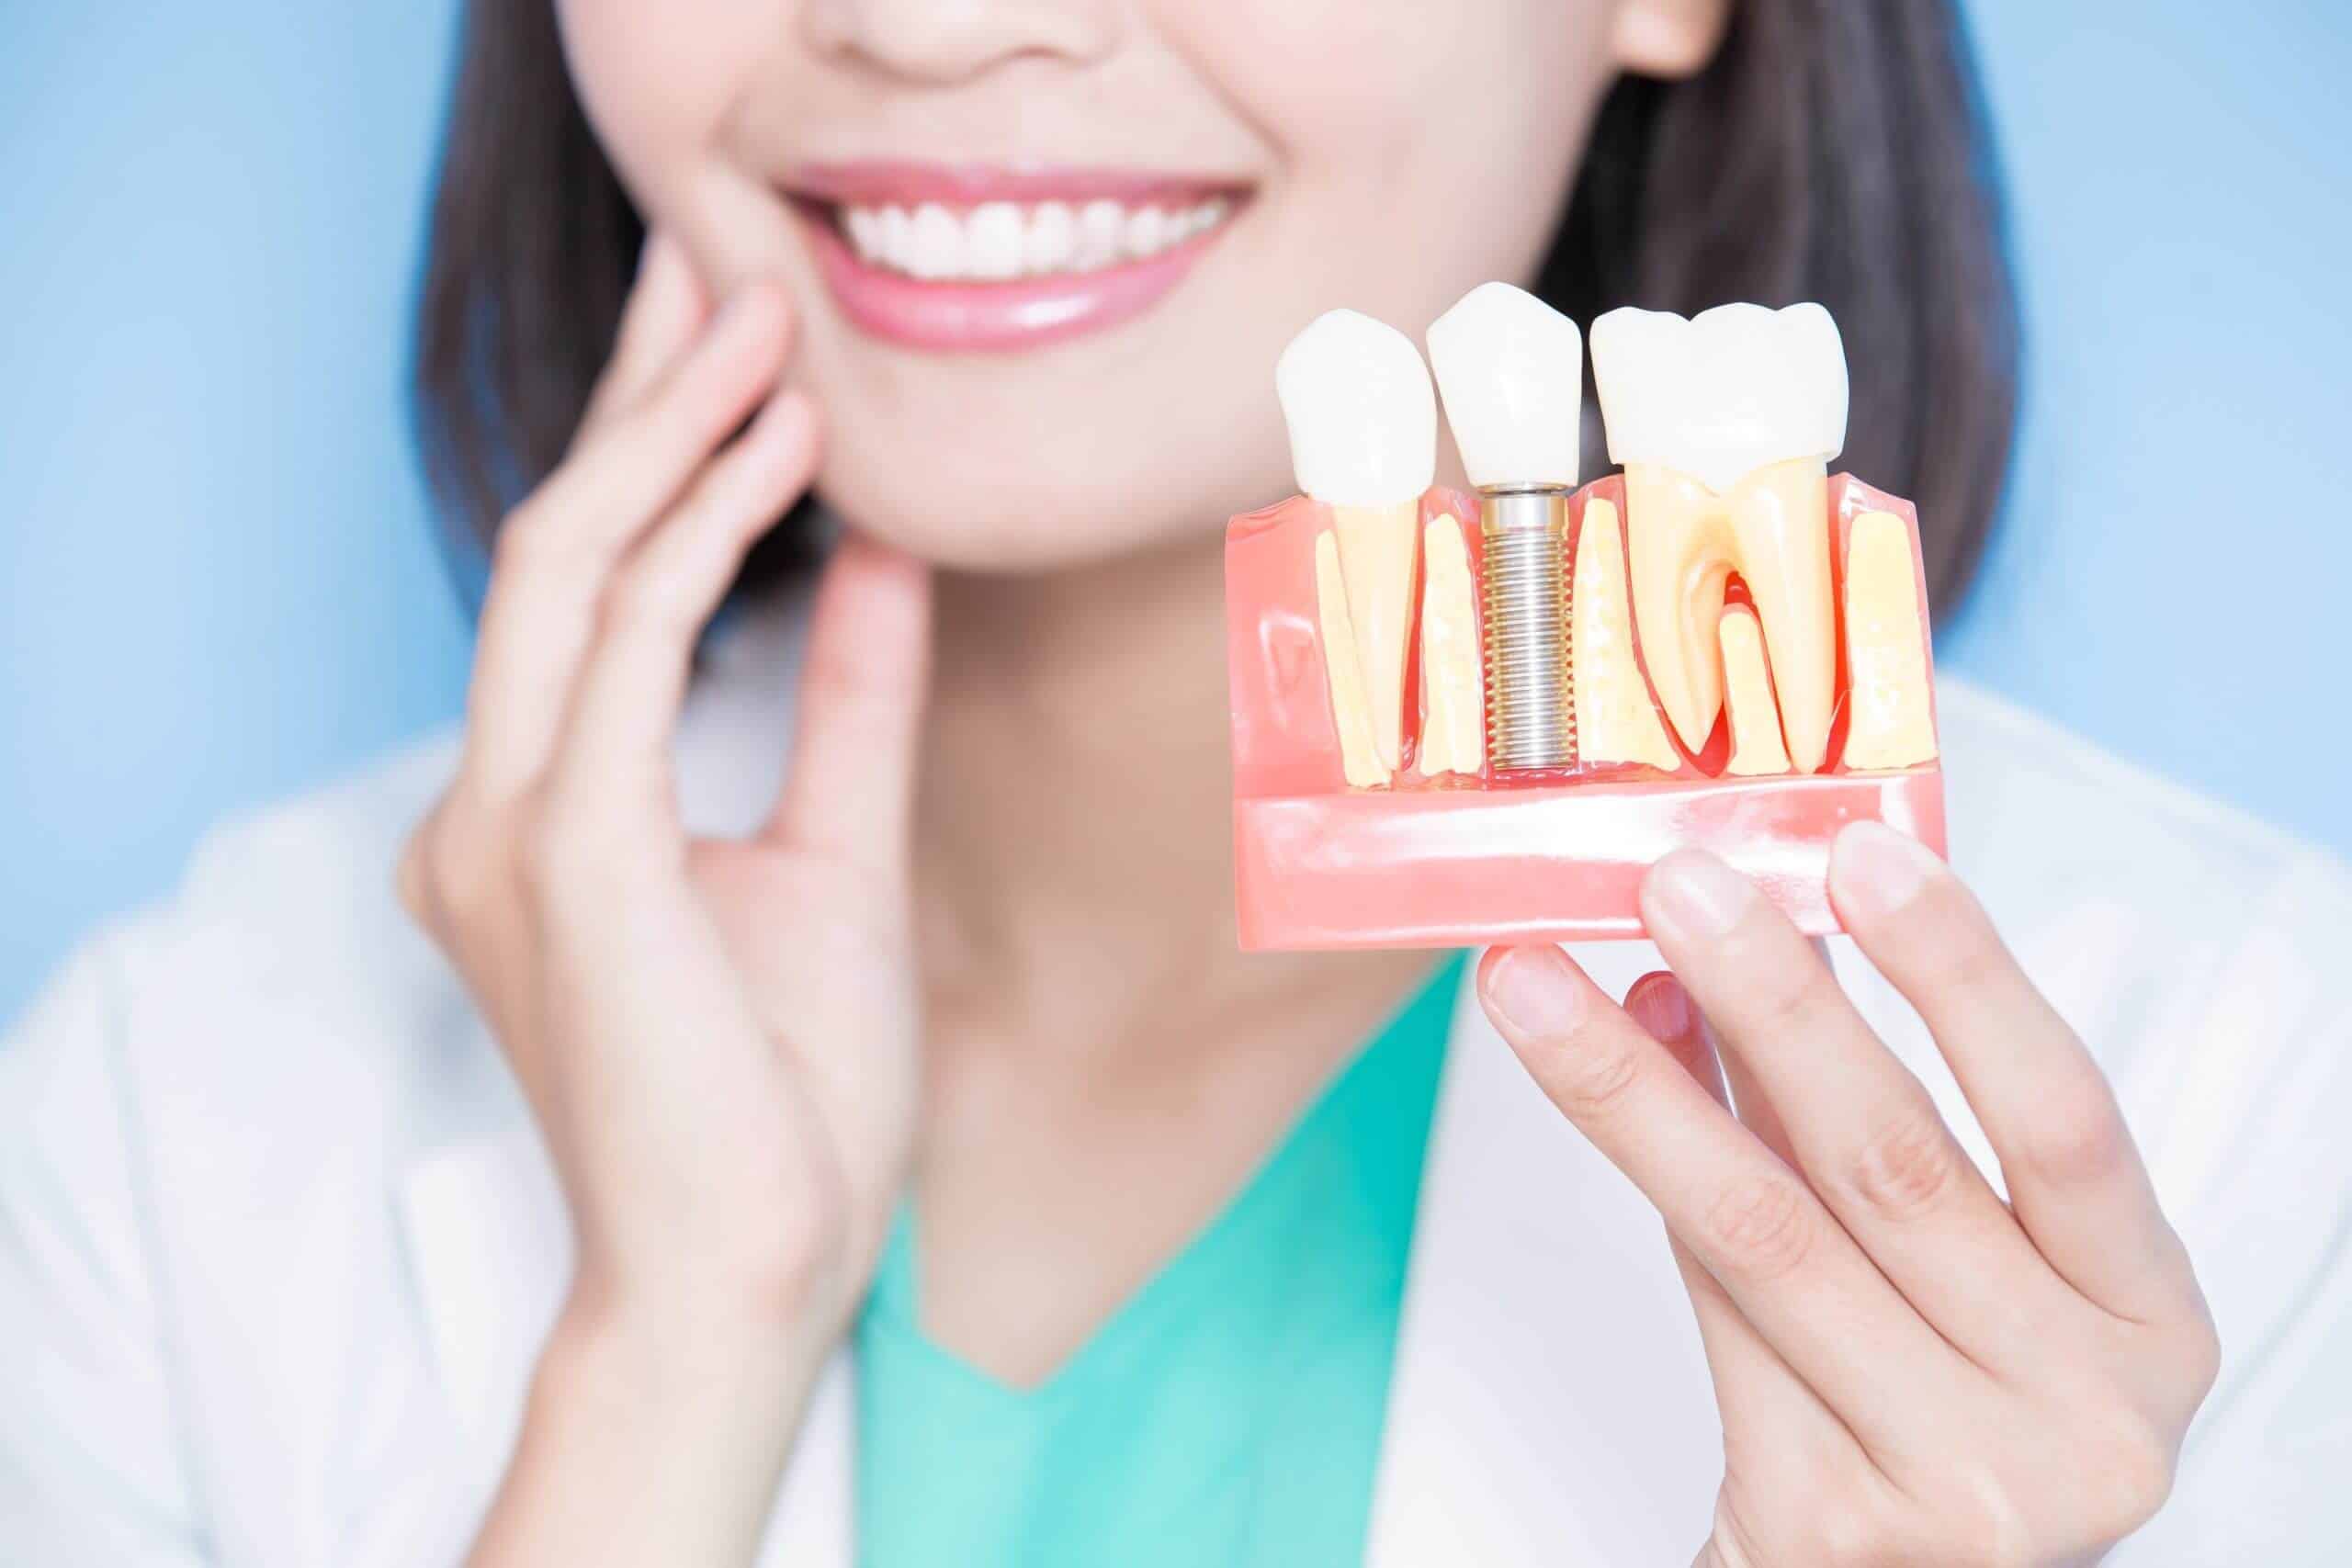 Step-by-Step Process of Getting Dental Implants What to Expect